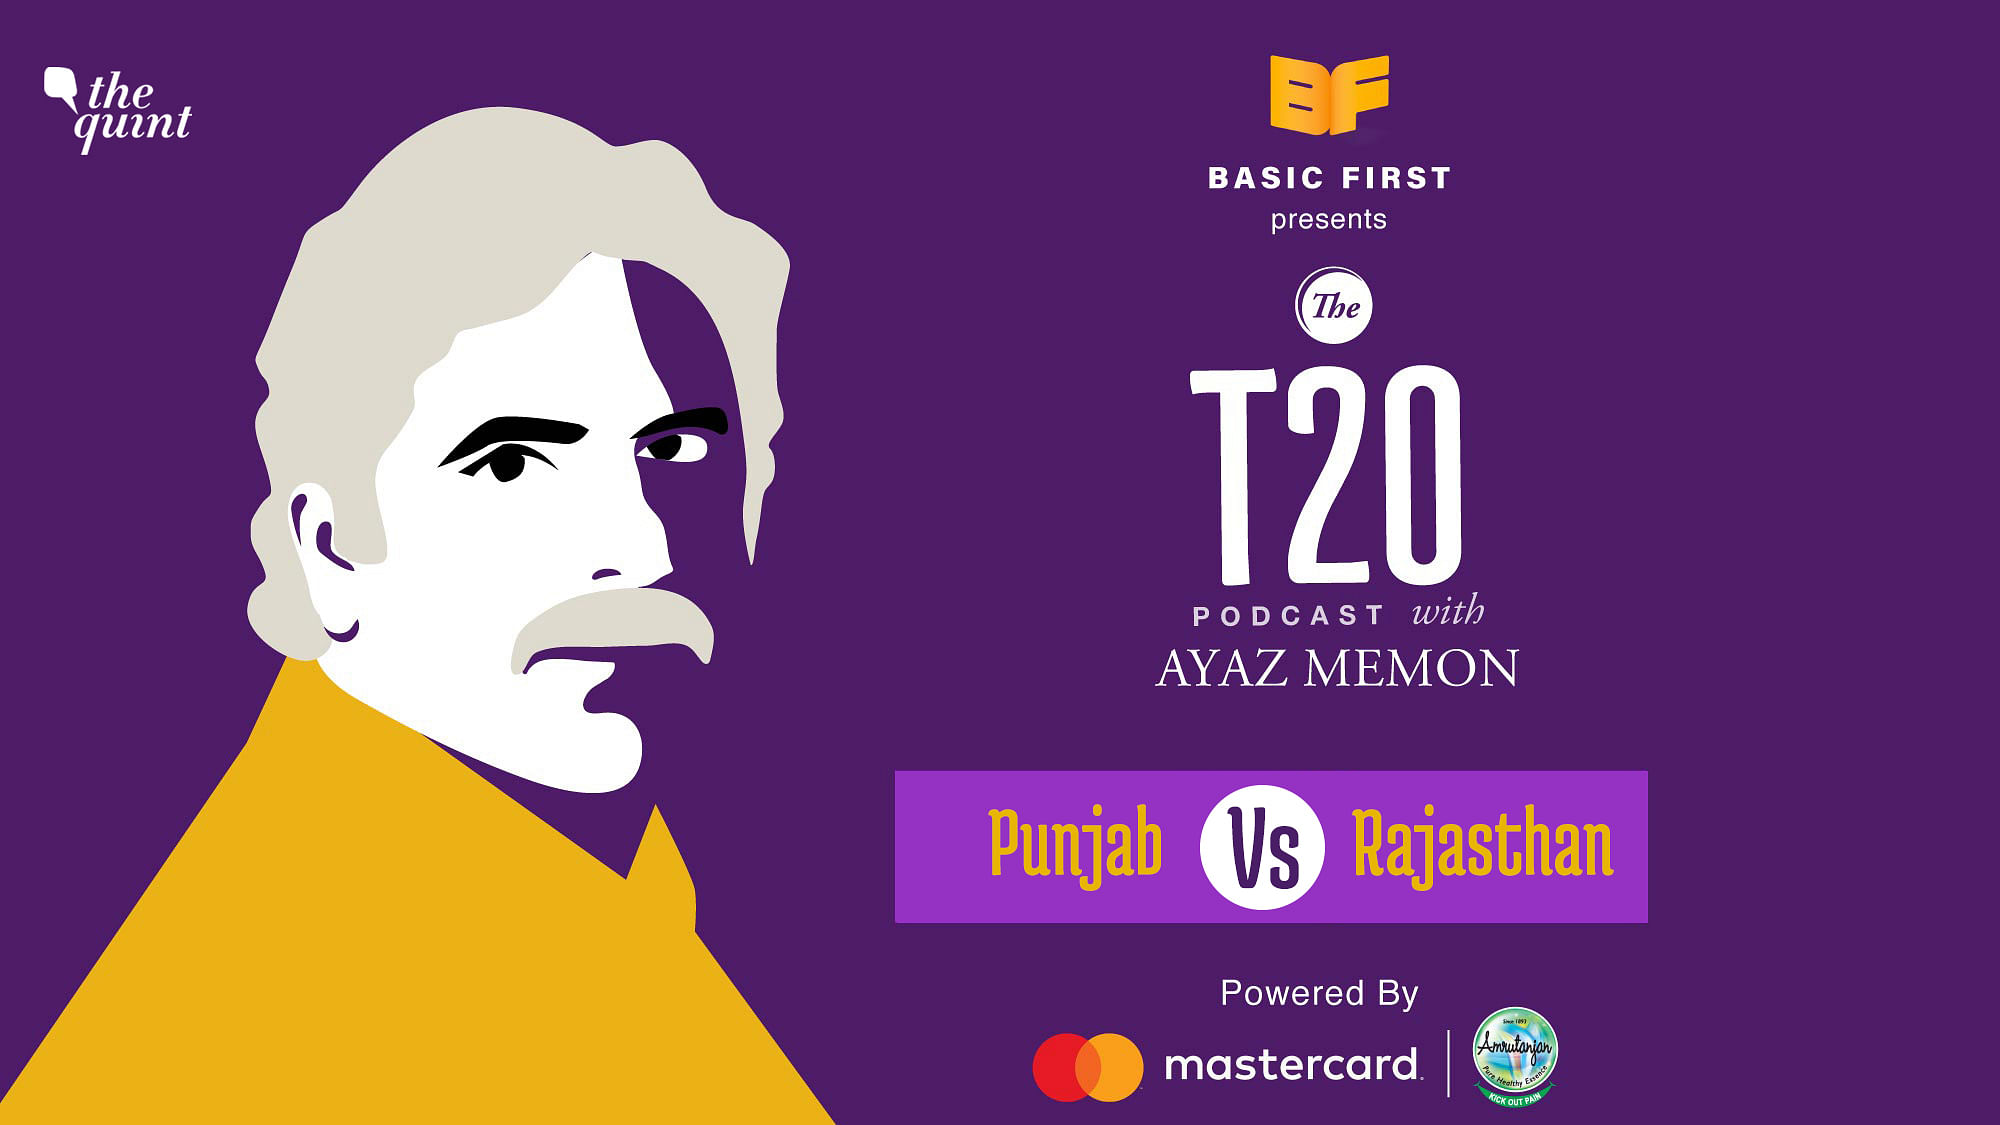 On Episode 50 of The T20 Podcast, Ayaz Memon and Mendra Dorjey discuss Rajasthan’s 7 wicket win over Punjab that ended their five match winning steak.